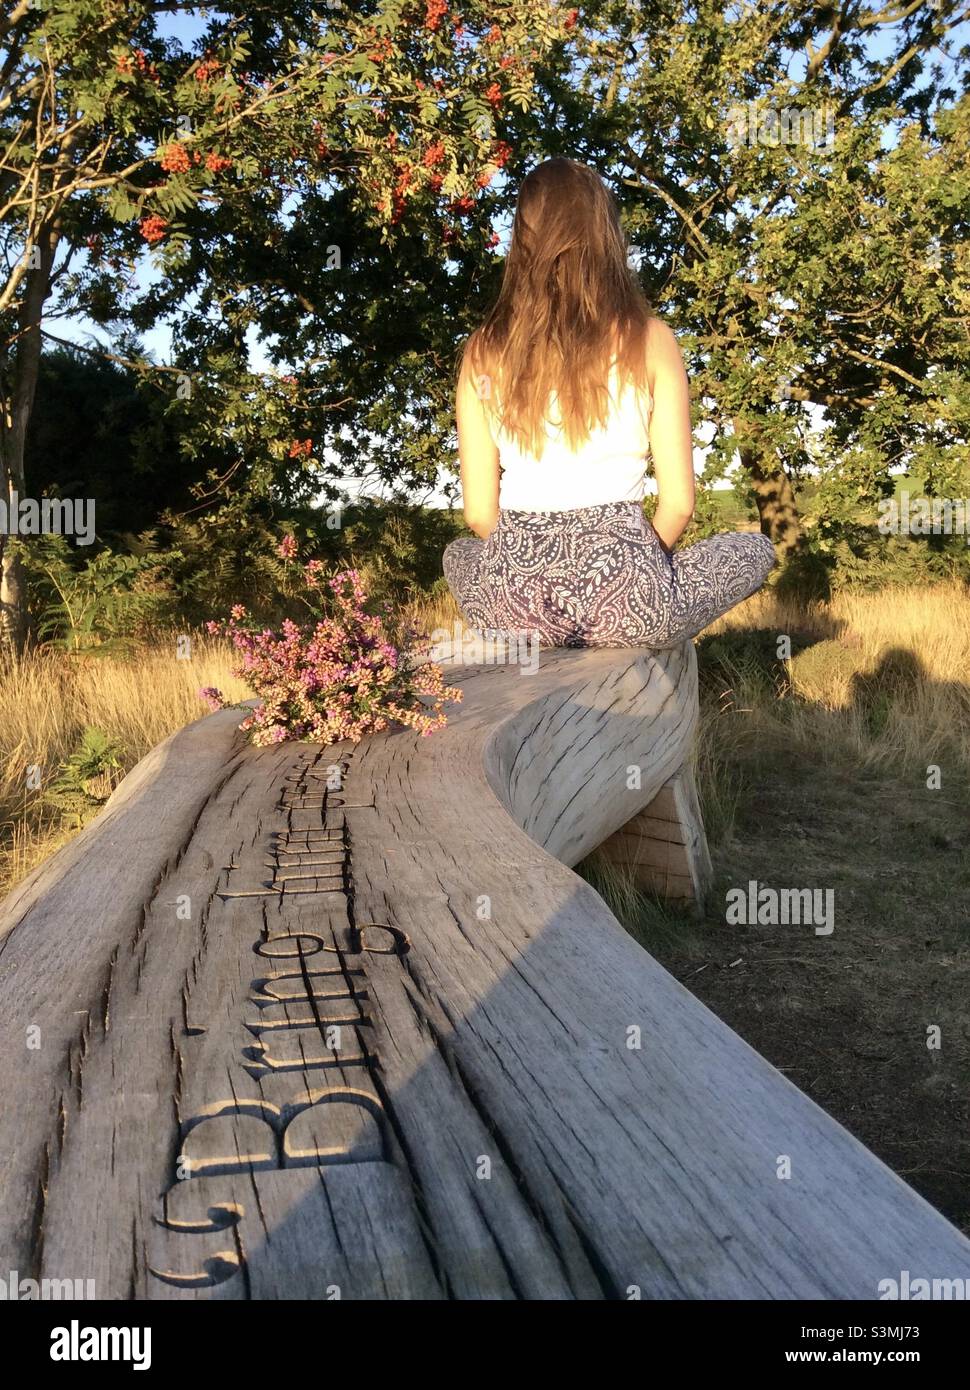 Girl sitting in the sunshine on a wooden bench, engraved with the words, “Bring him peace”, with a bunch of picked pink heather flowers Stock Photo